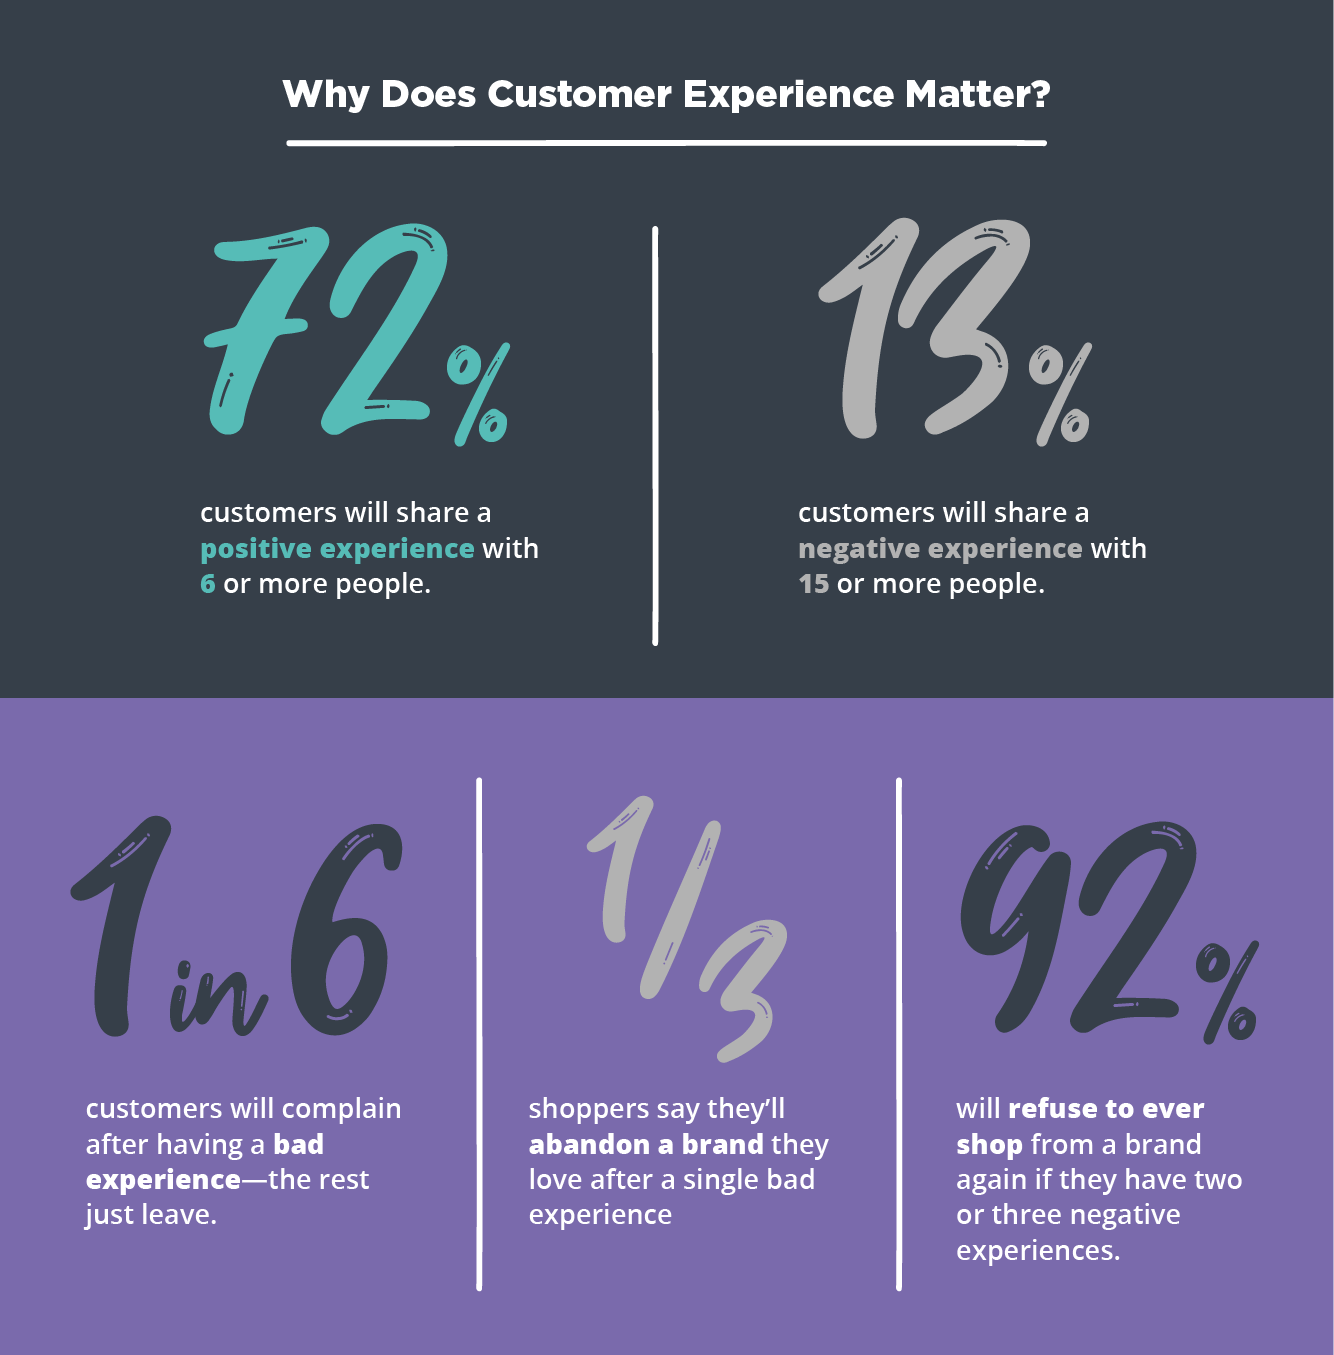 Why Does Customer Experience Matter?